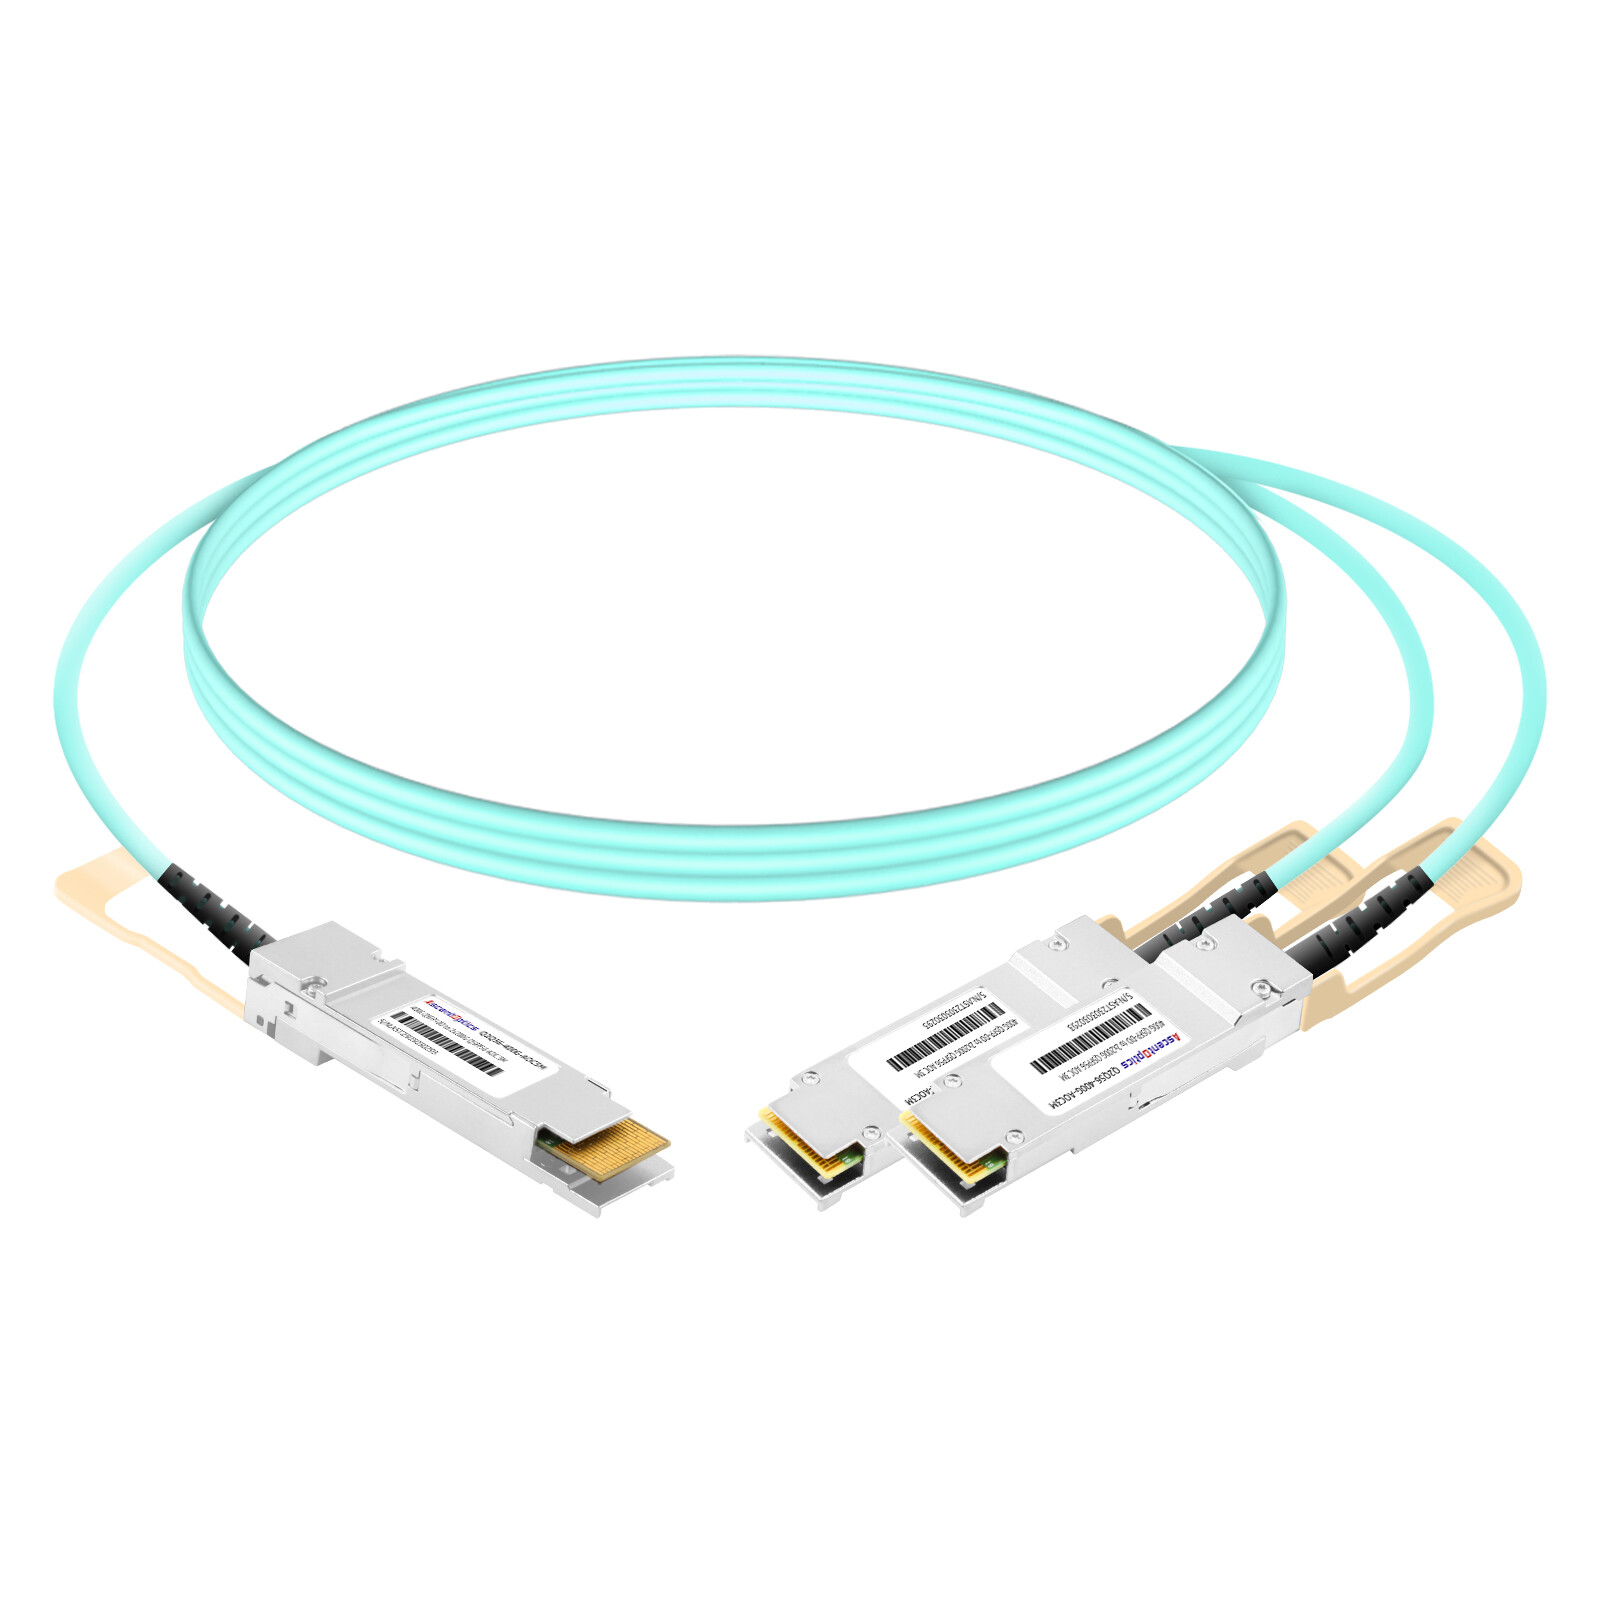 400G QSFP-DD to 2x 200G QSFP56 Breakout AOC Cable,3 Meters